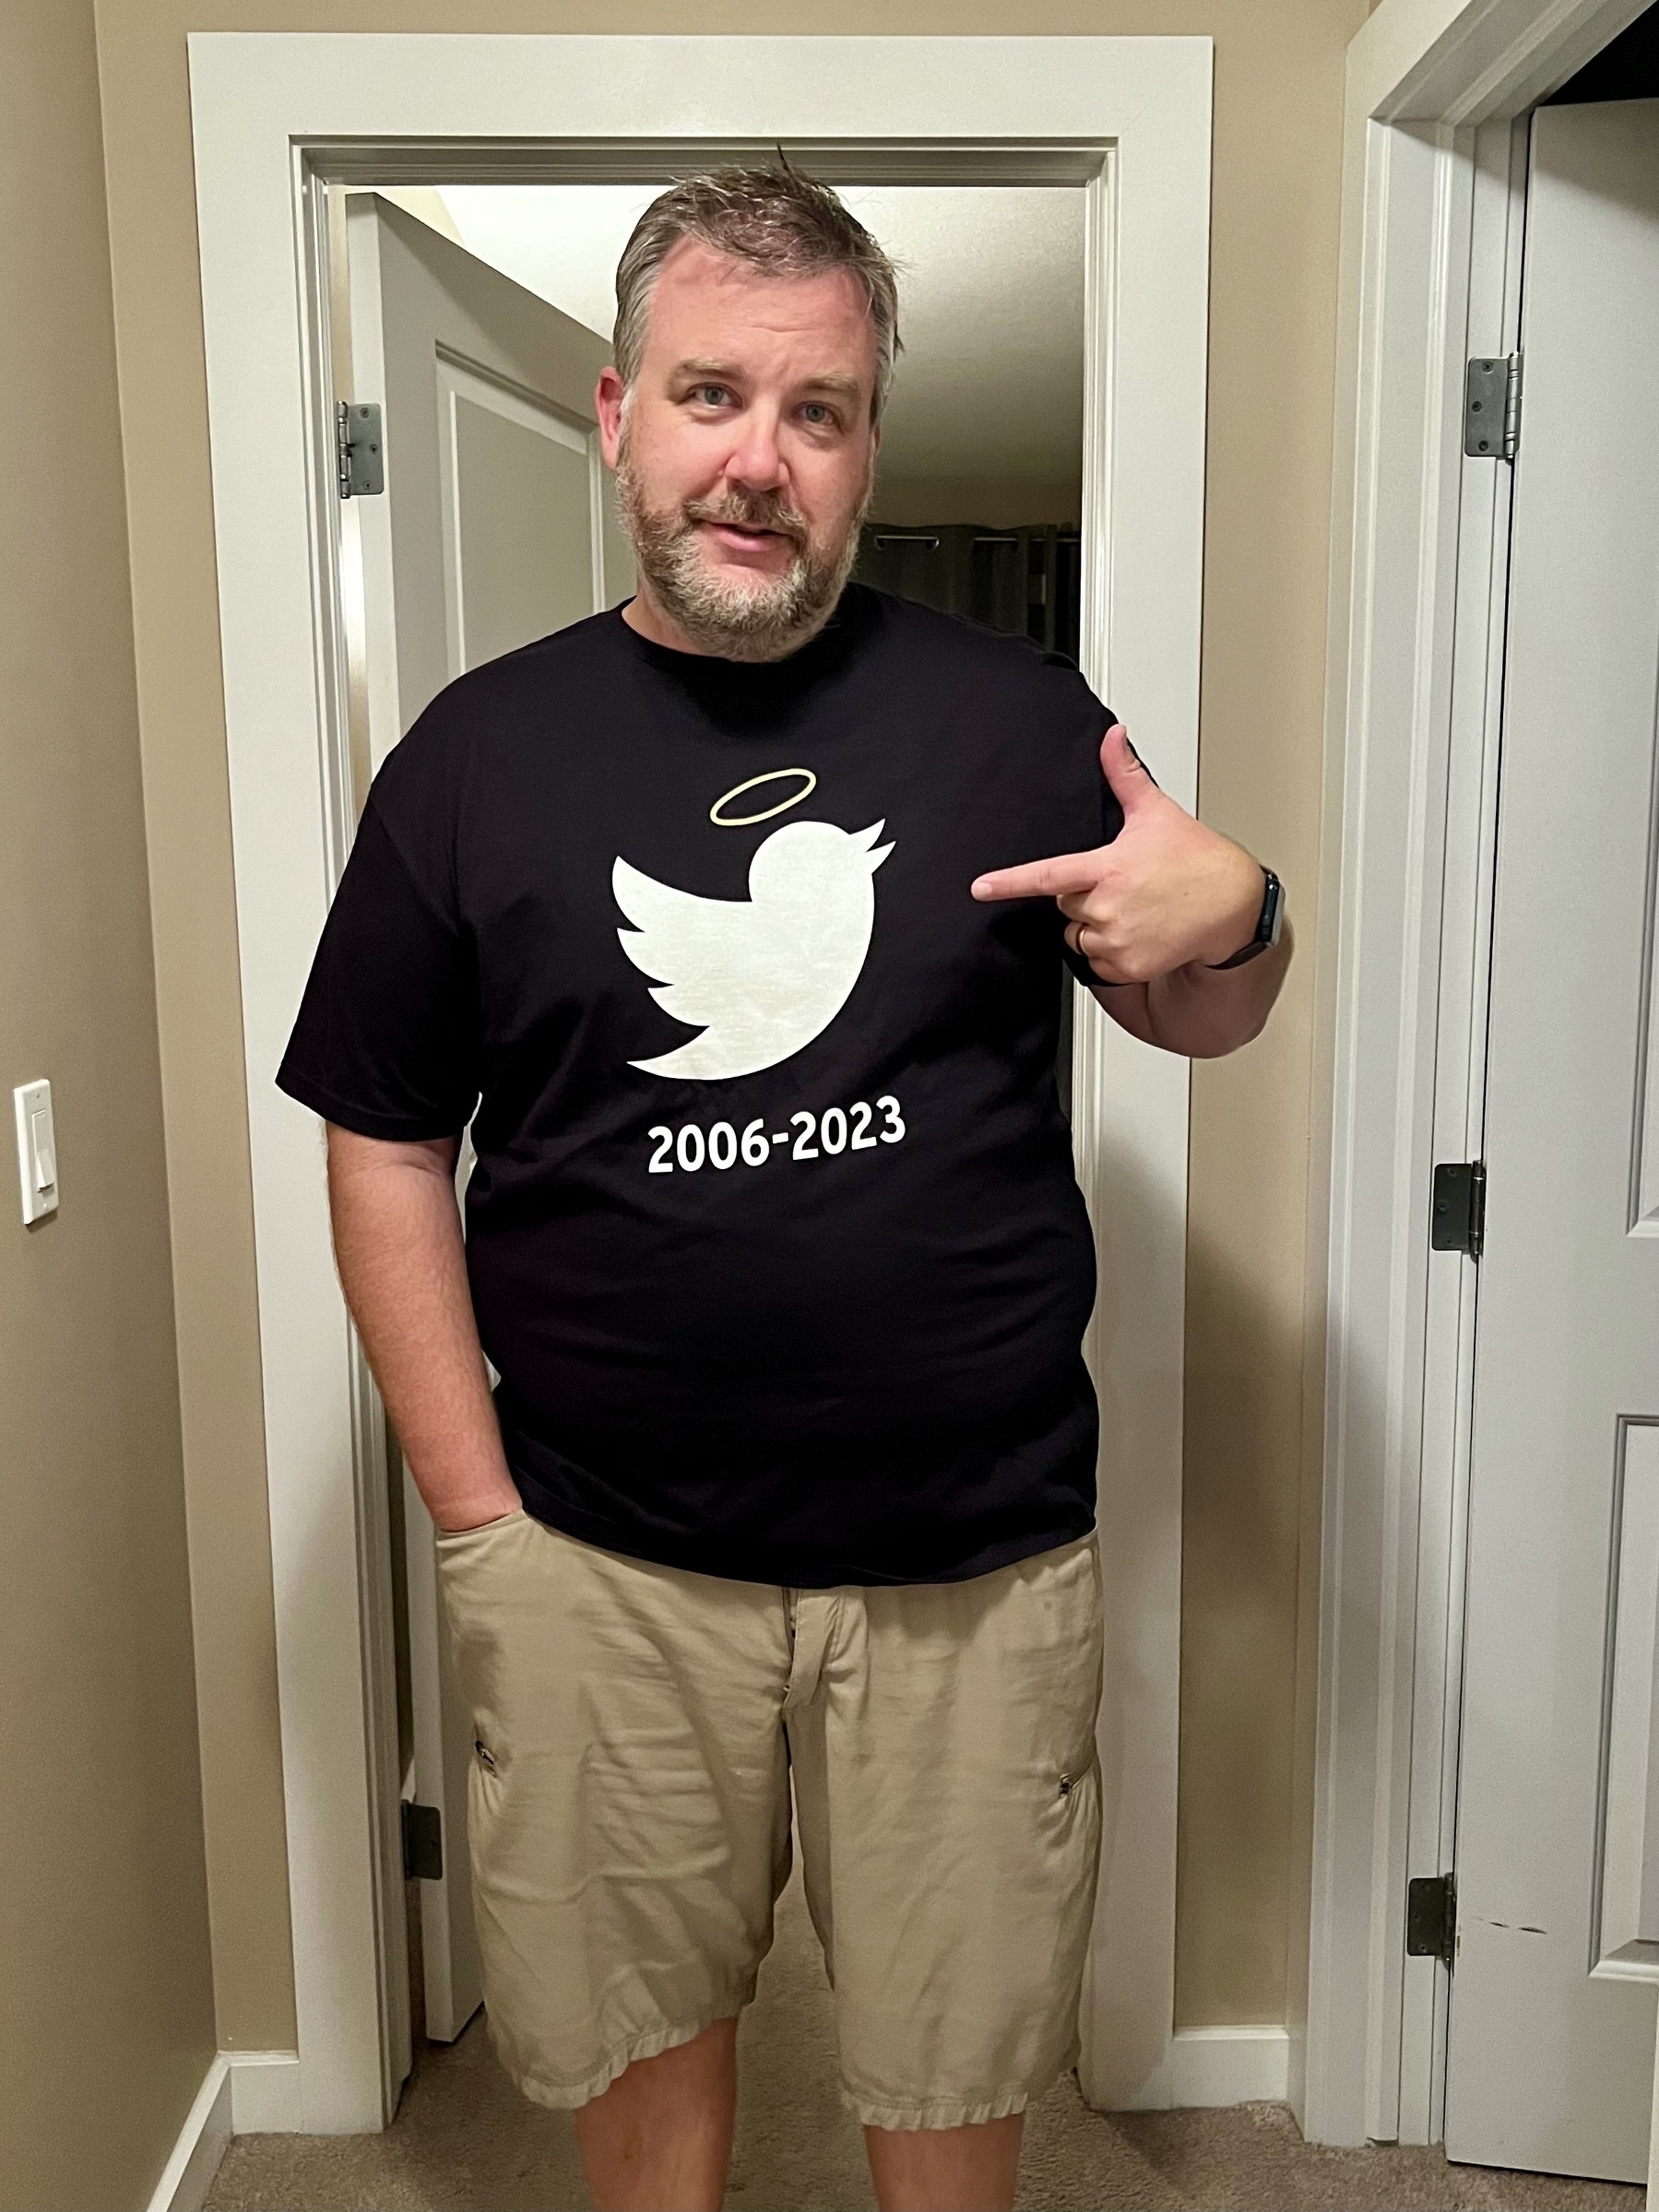 Me wearing a shirt that has the Twitter bird logo with a 2006 - 2023, and a halo over the bird.